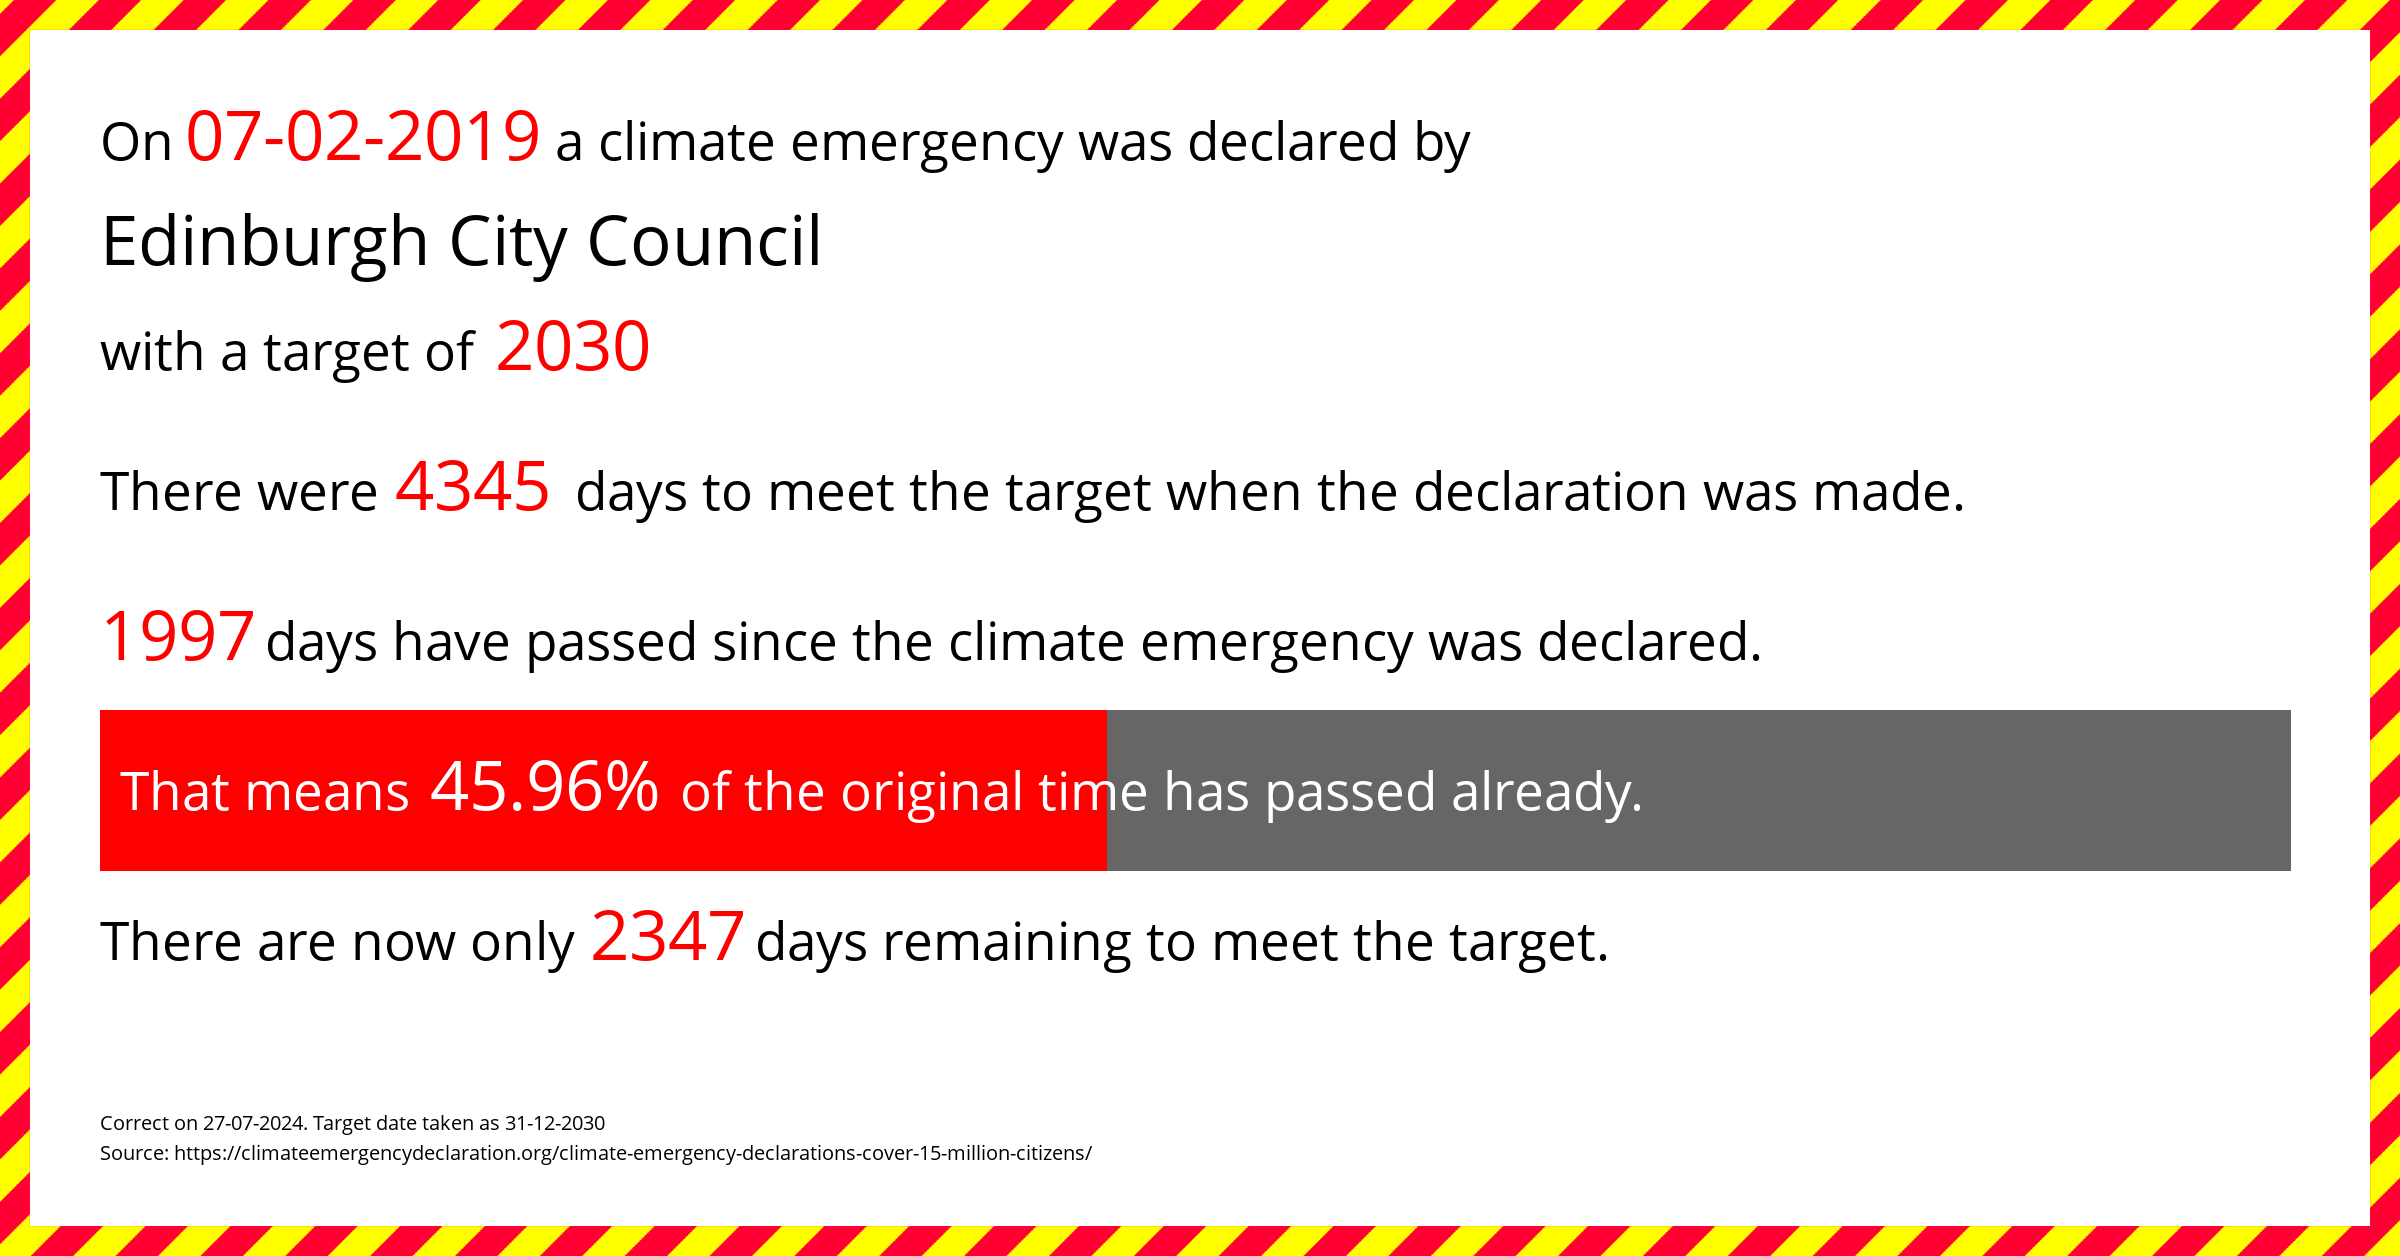 Edinburgh City Council declared a Climate emergency on Thursday 7th February 2019, with a target of 2030.